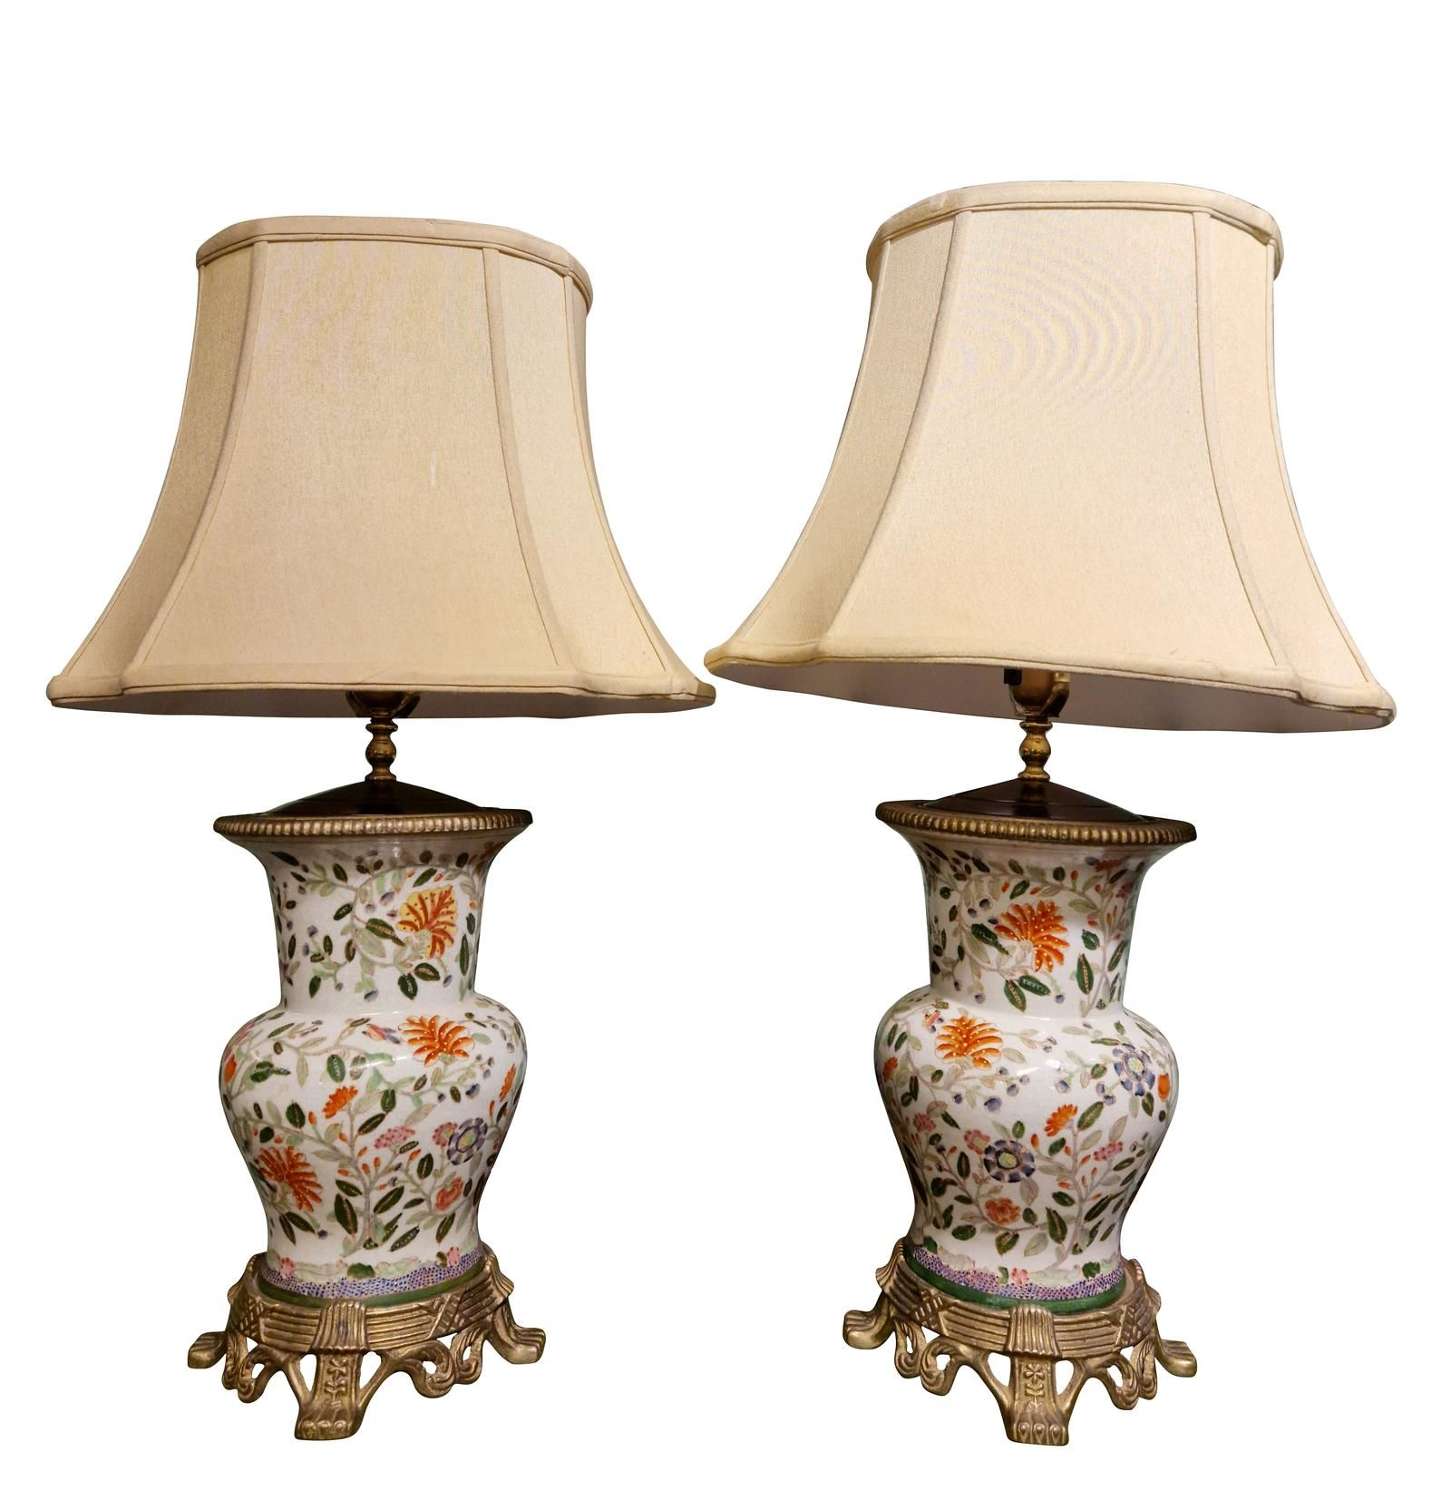 Pair of Asian Table Lamps